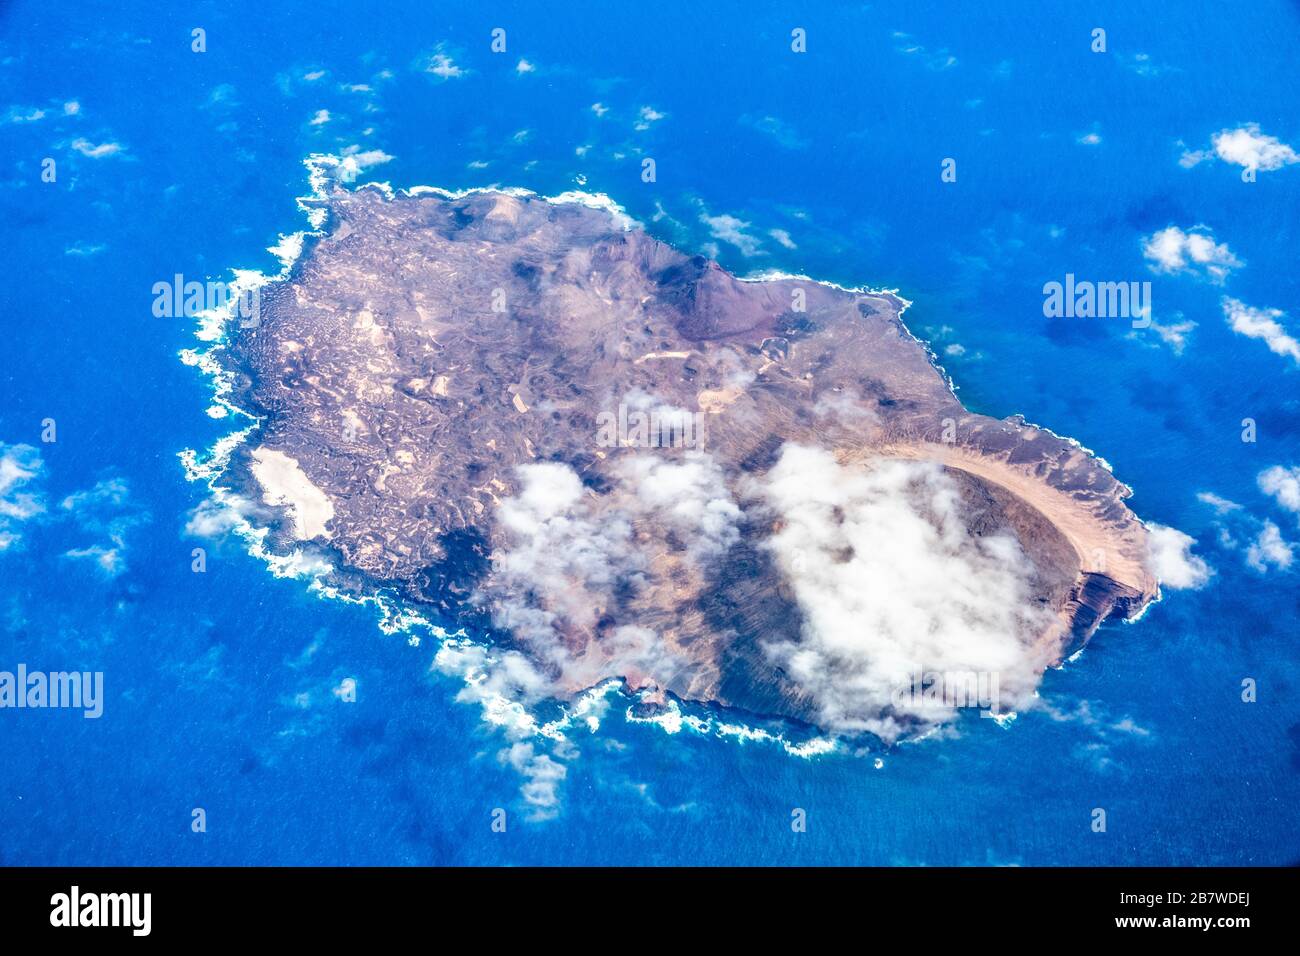 An aerial view of the volcanic island Isla de Alegranza off the Canary Island of Lanzarote. Stock Photo